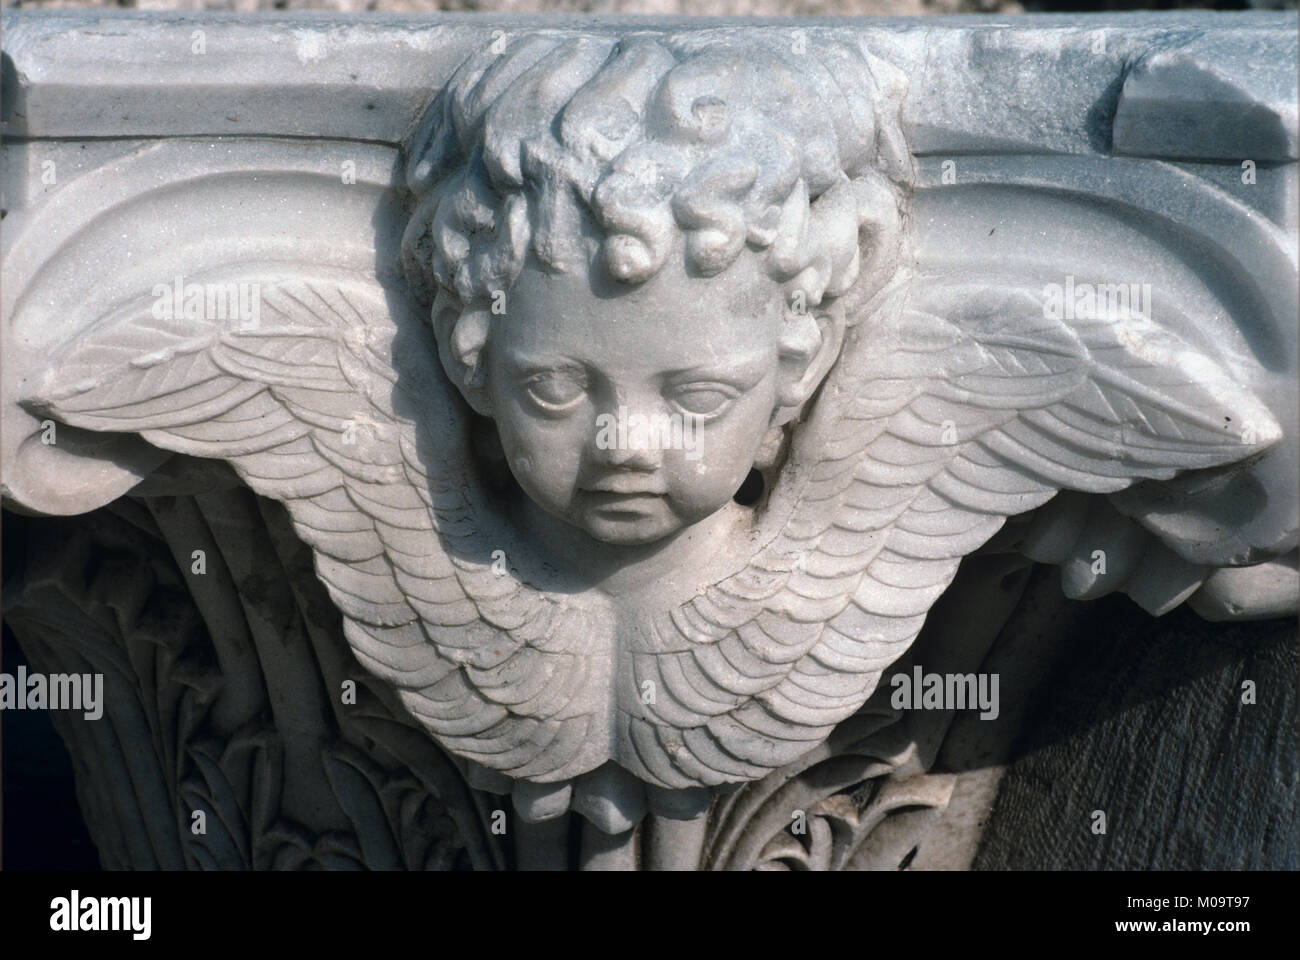 Cherub or Winged Angel Classical Marble Capital Architectural Detail from the Ancient Classical Greek City of Kyssos or Kysos, or Roman Cysus, modern-day Cesme, near Izmir, Turkey Stock Photo